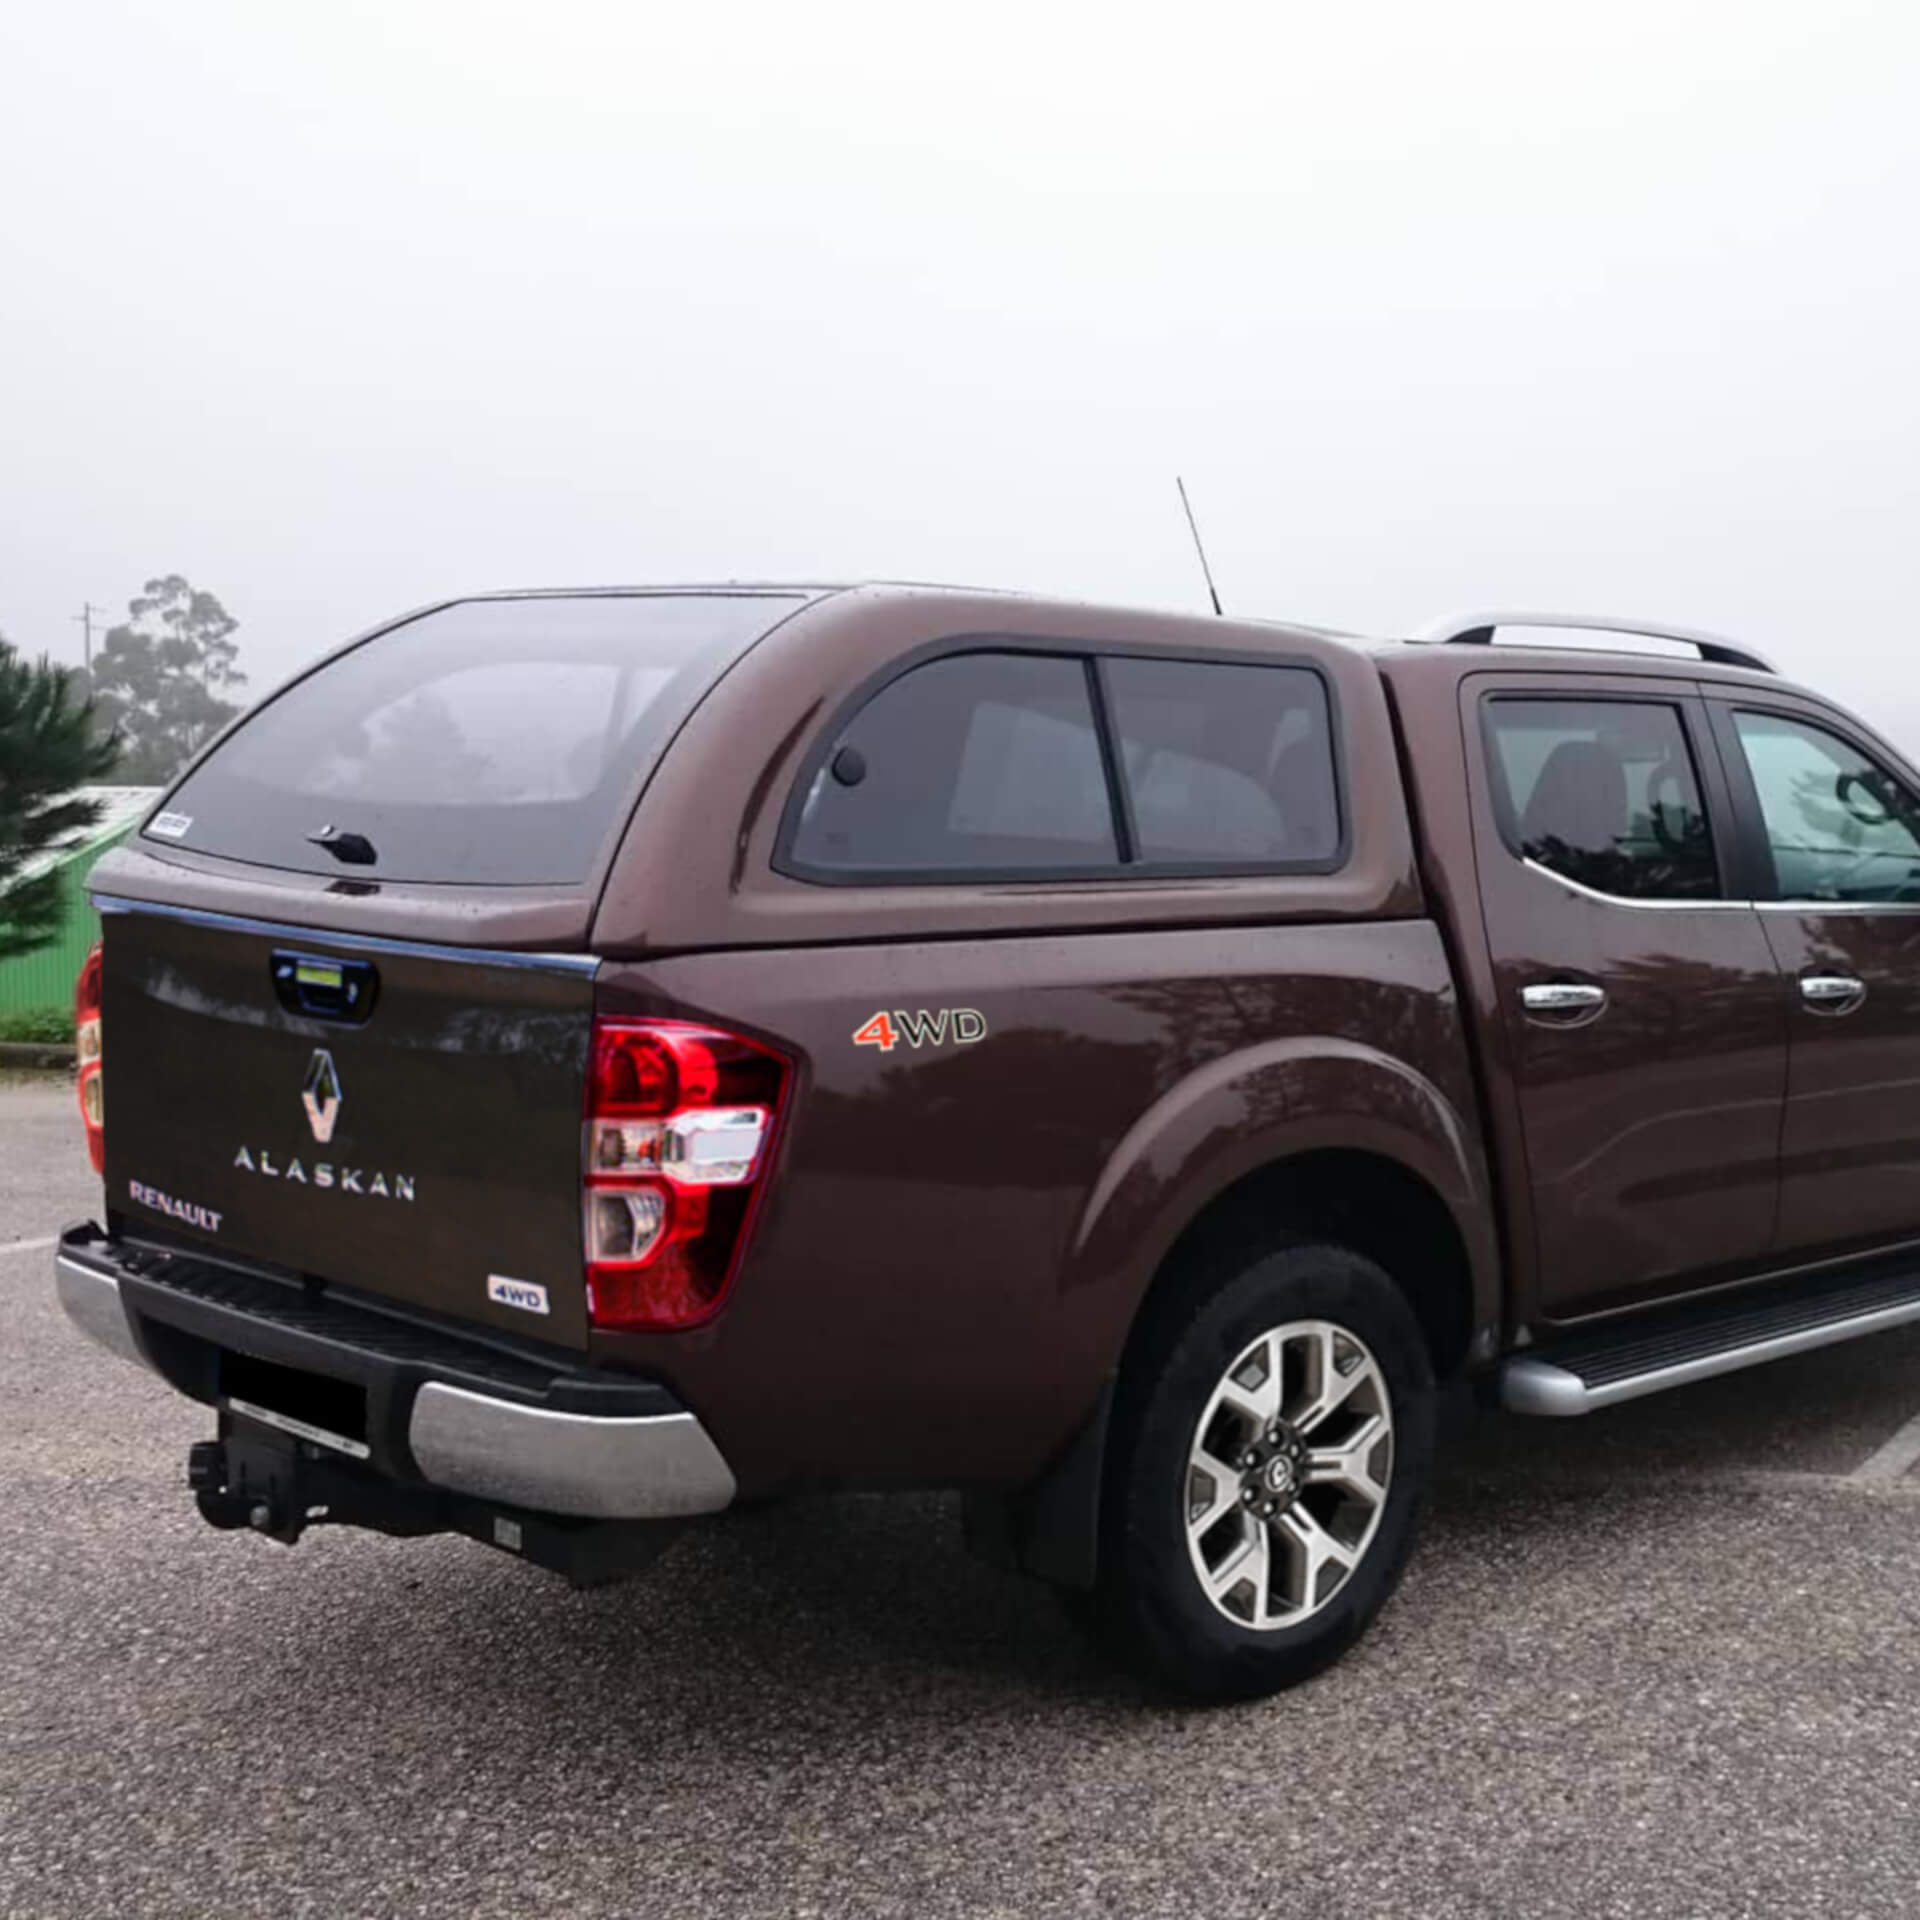 Direct4x4 accessories for Renault Alaskan vehicles with a photo of the back of a Renault Alaskan fitted with a canopy